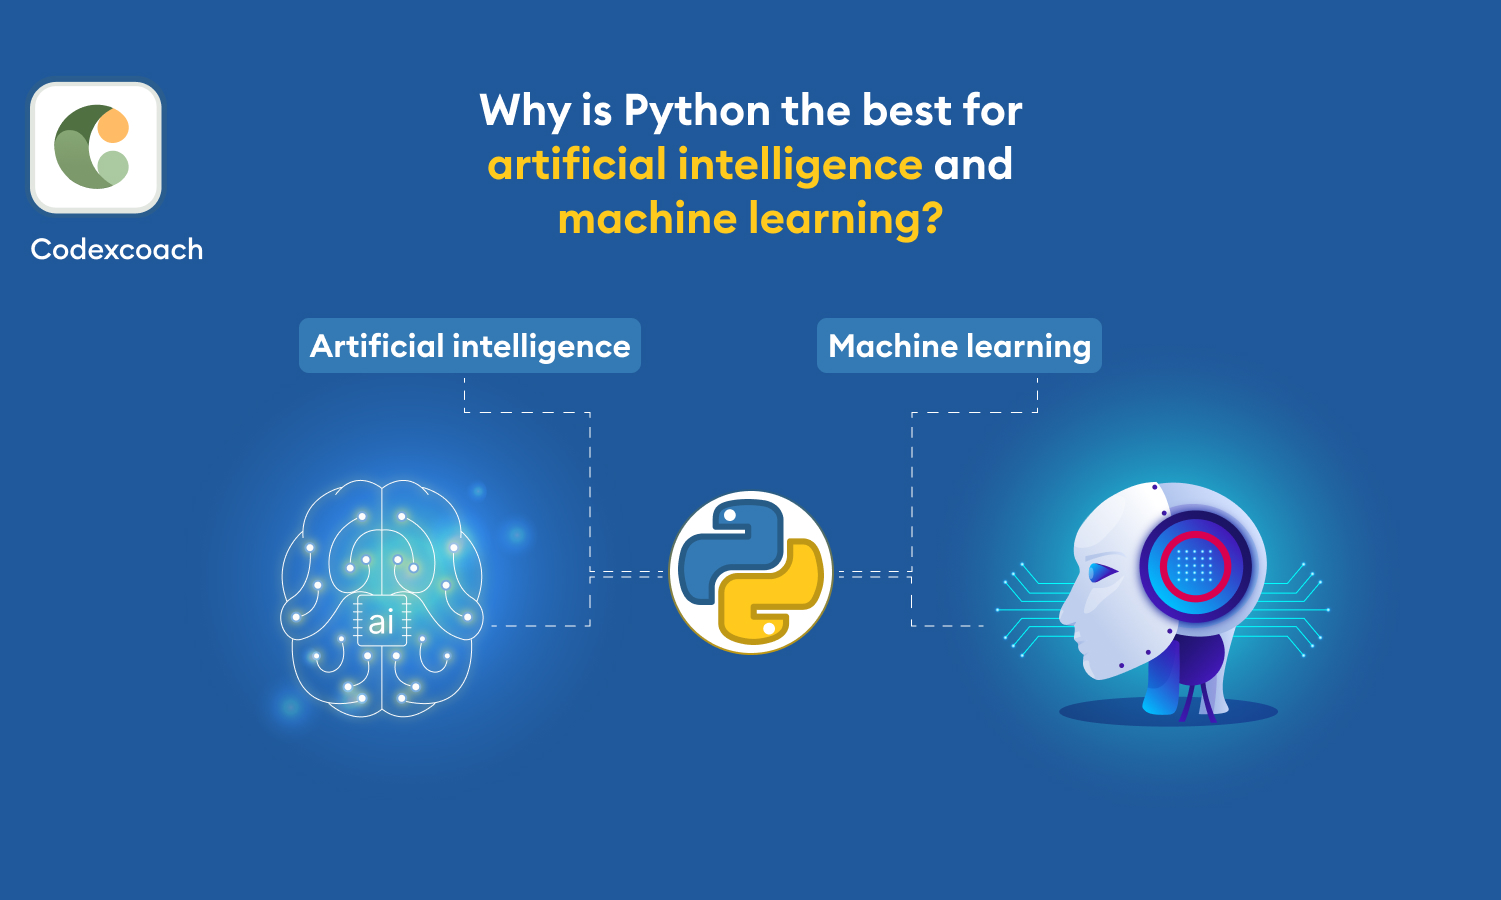 Why is Python the best for artificial intelligence and machine learning?